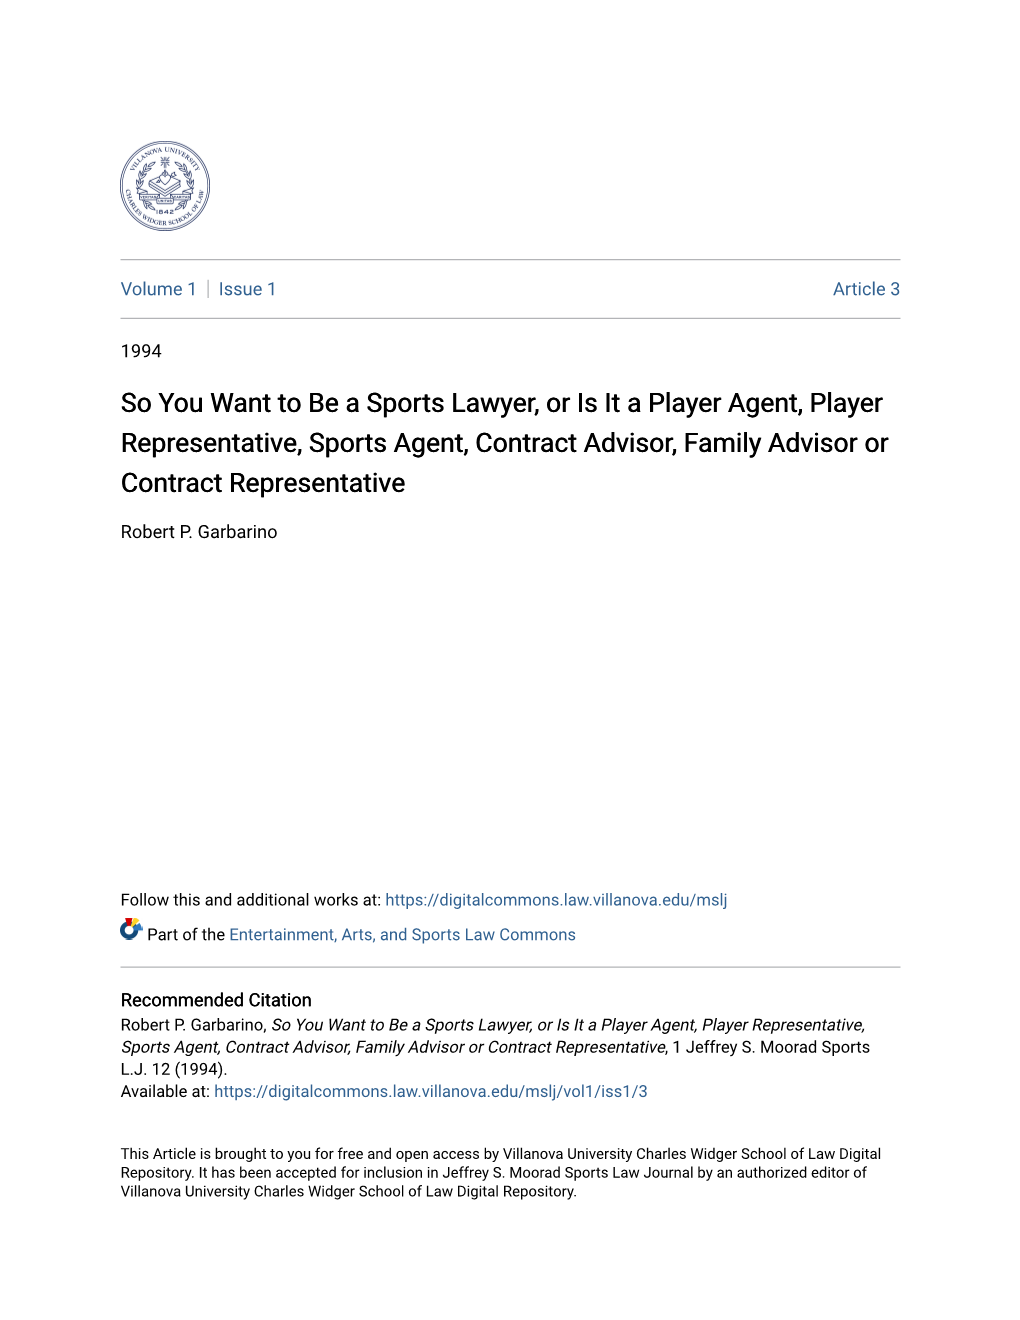 So You Want to Be a Sports Lawyer, Or Is It a Player Agent, Player Representative, Sports Agent, Contract Advisor, Family Advisor Or Contract Representative